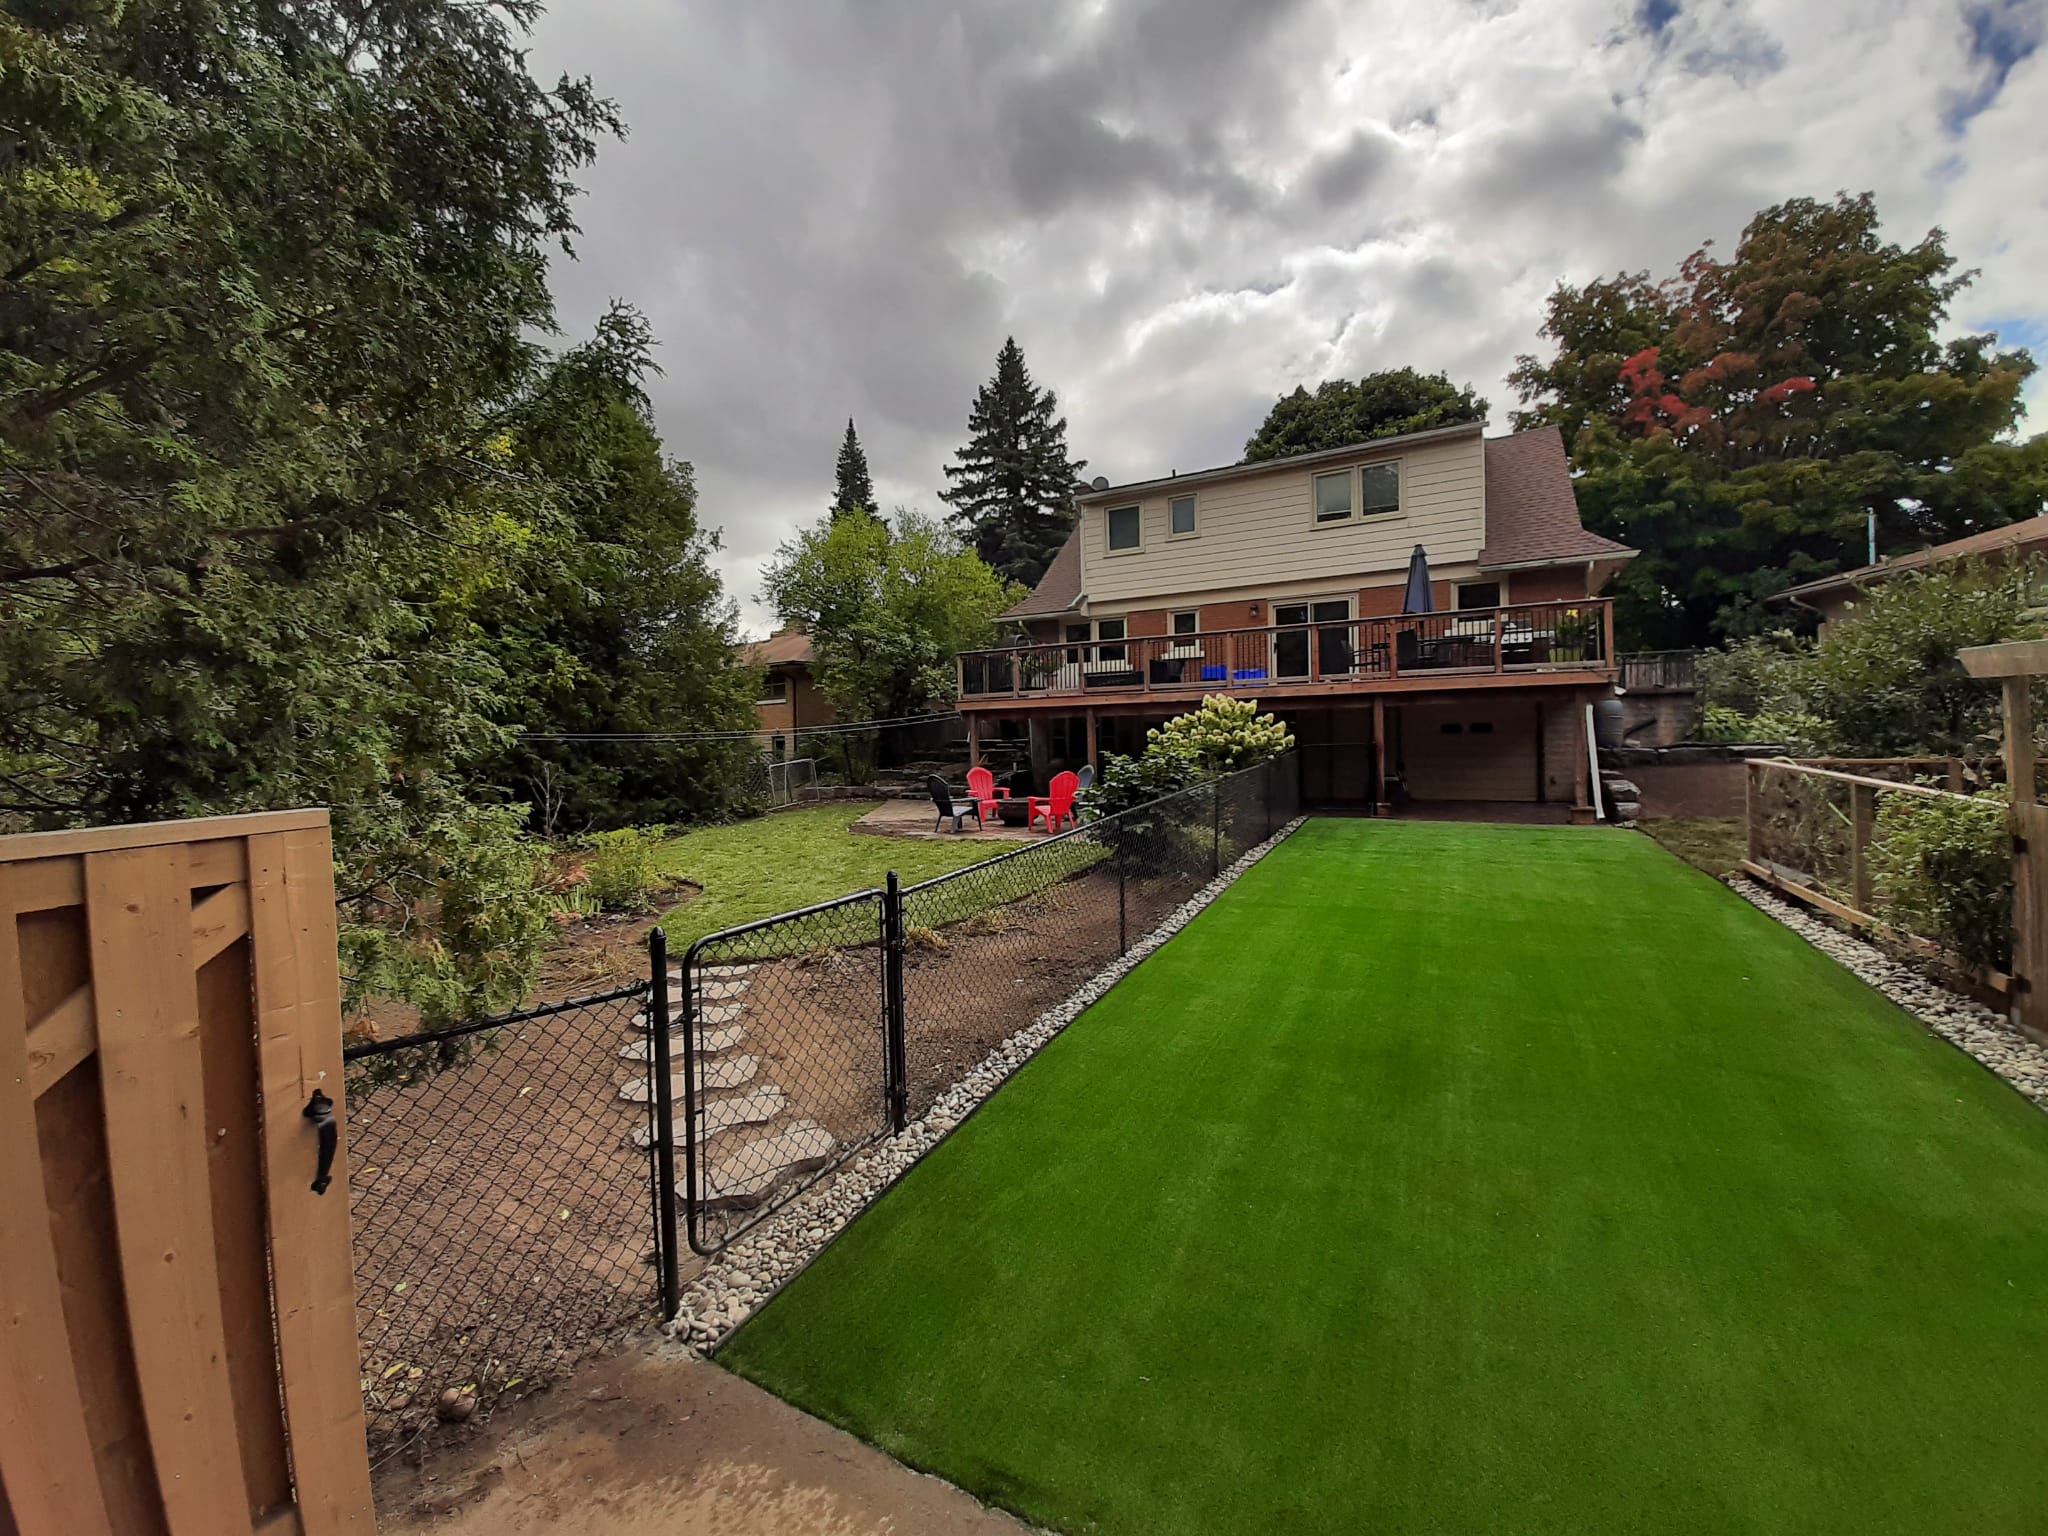 photograph of a backyard with an emphasis on the nice looking grass